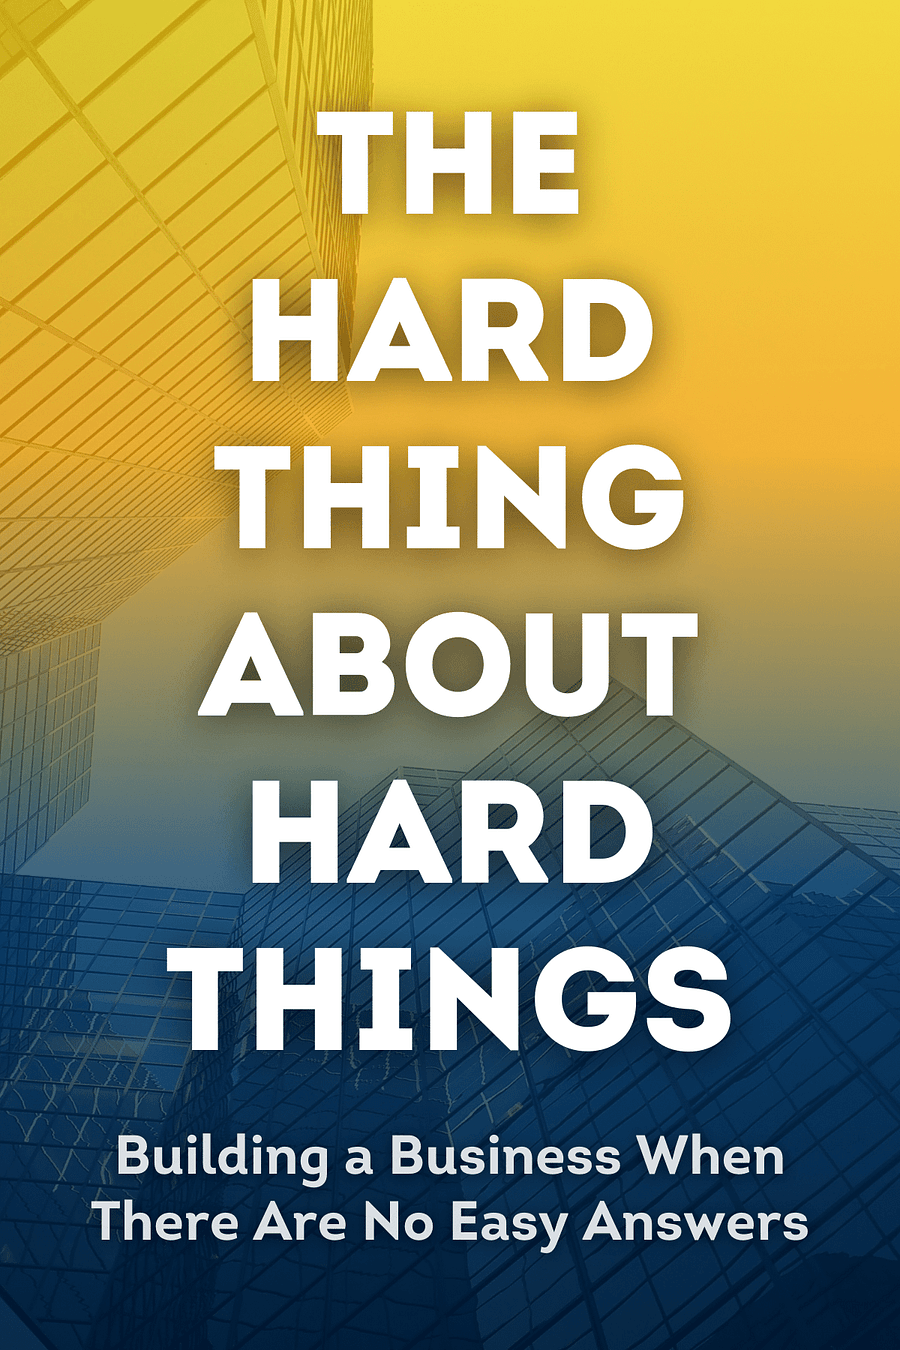 The Hard Thing About Hard Things by Ben Horowitz - Book Summary